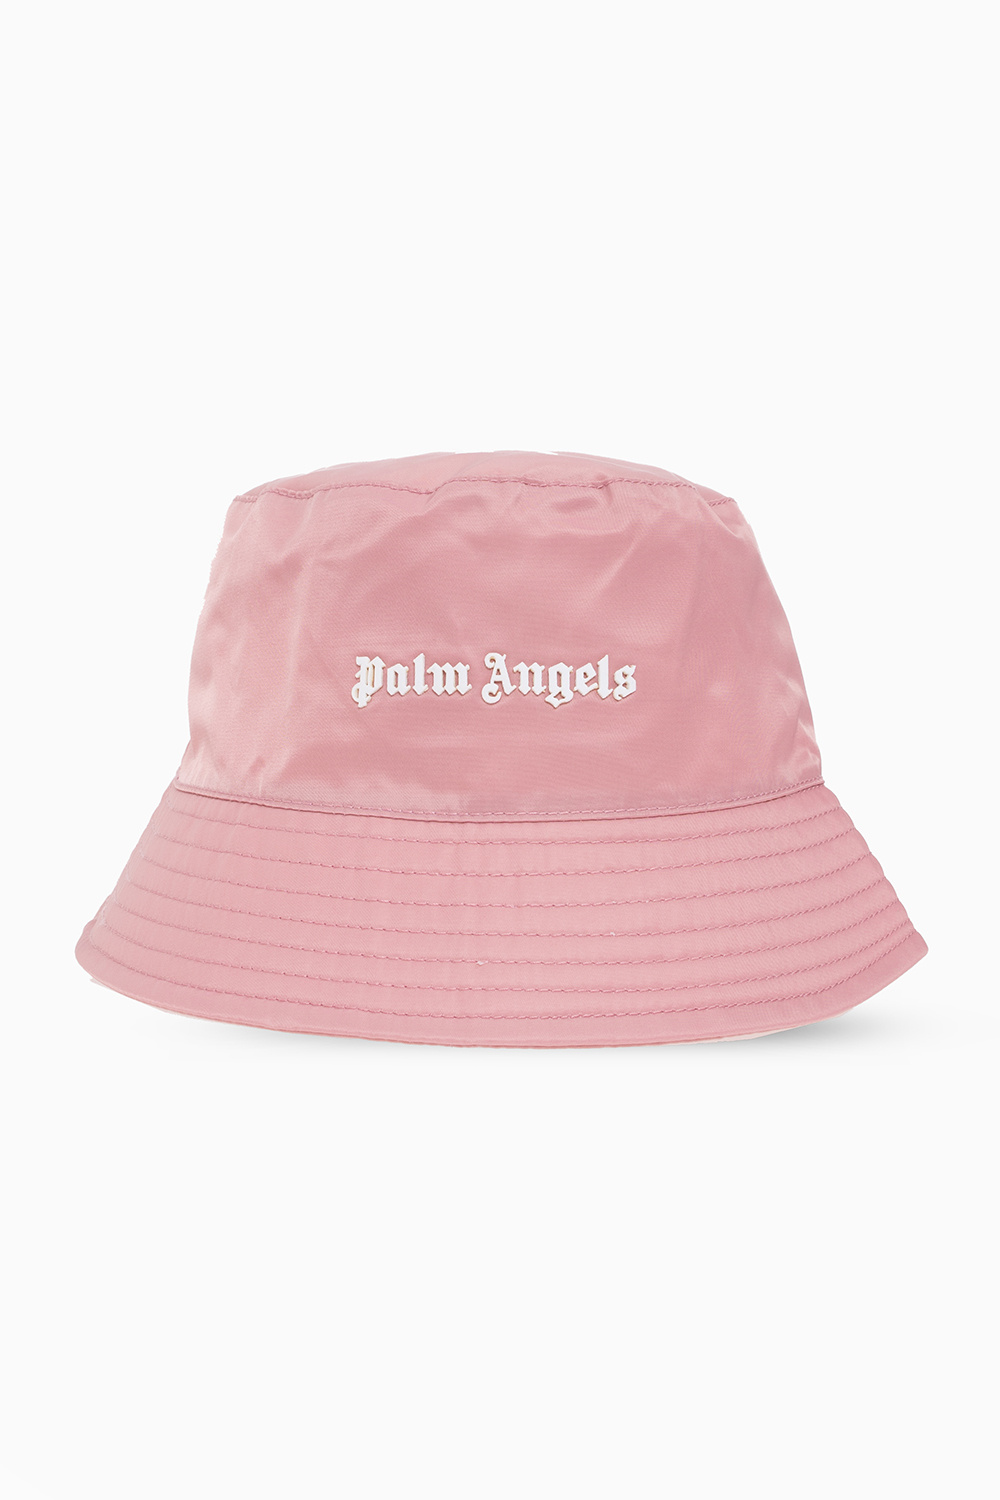 Palm Angels Bucket Basis hat with logo